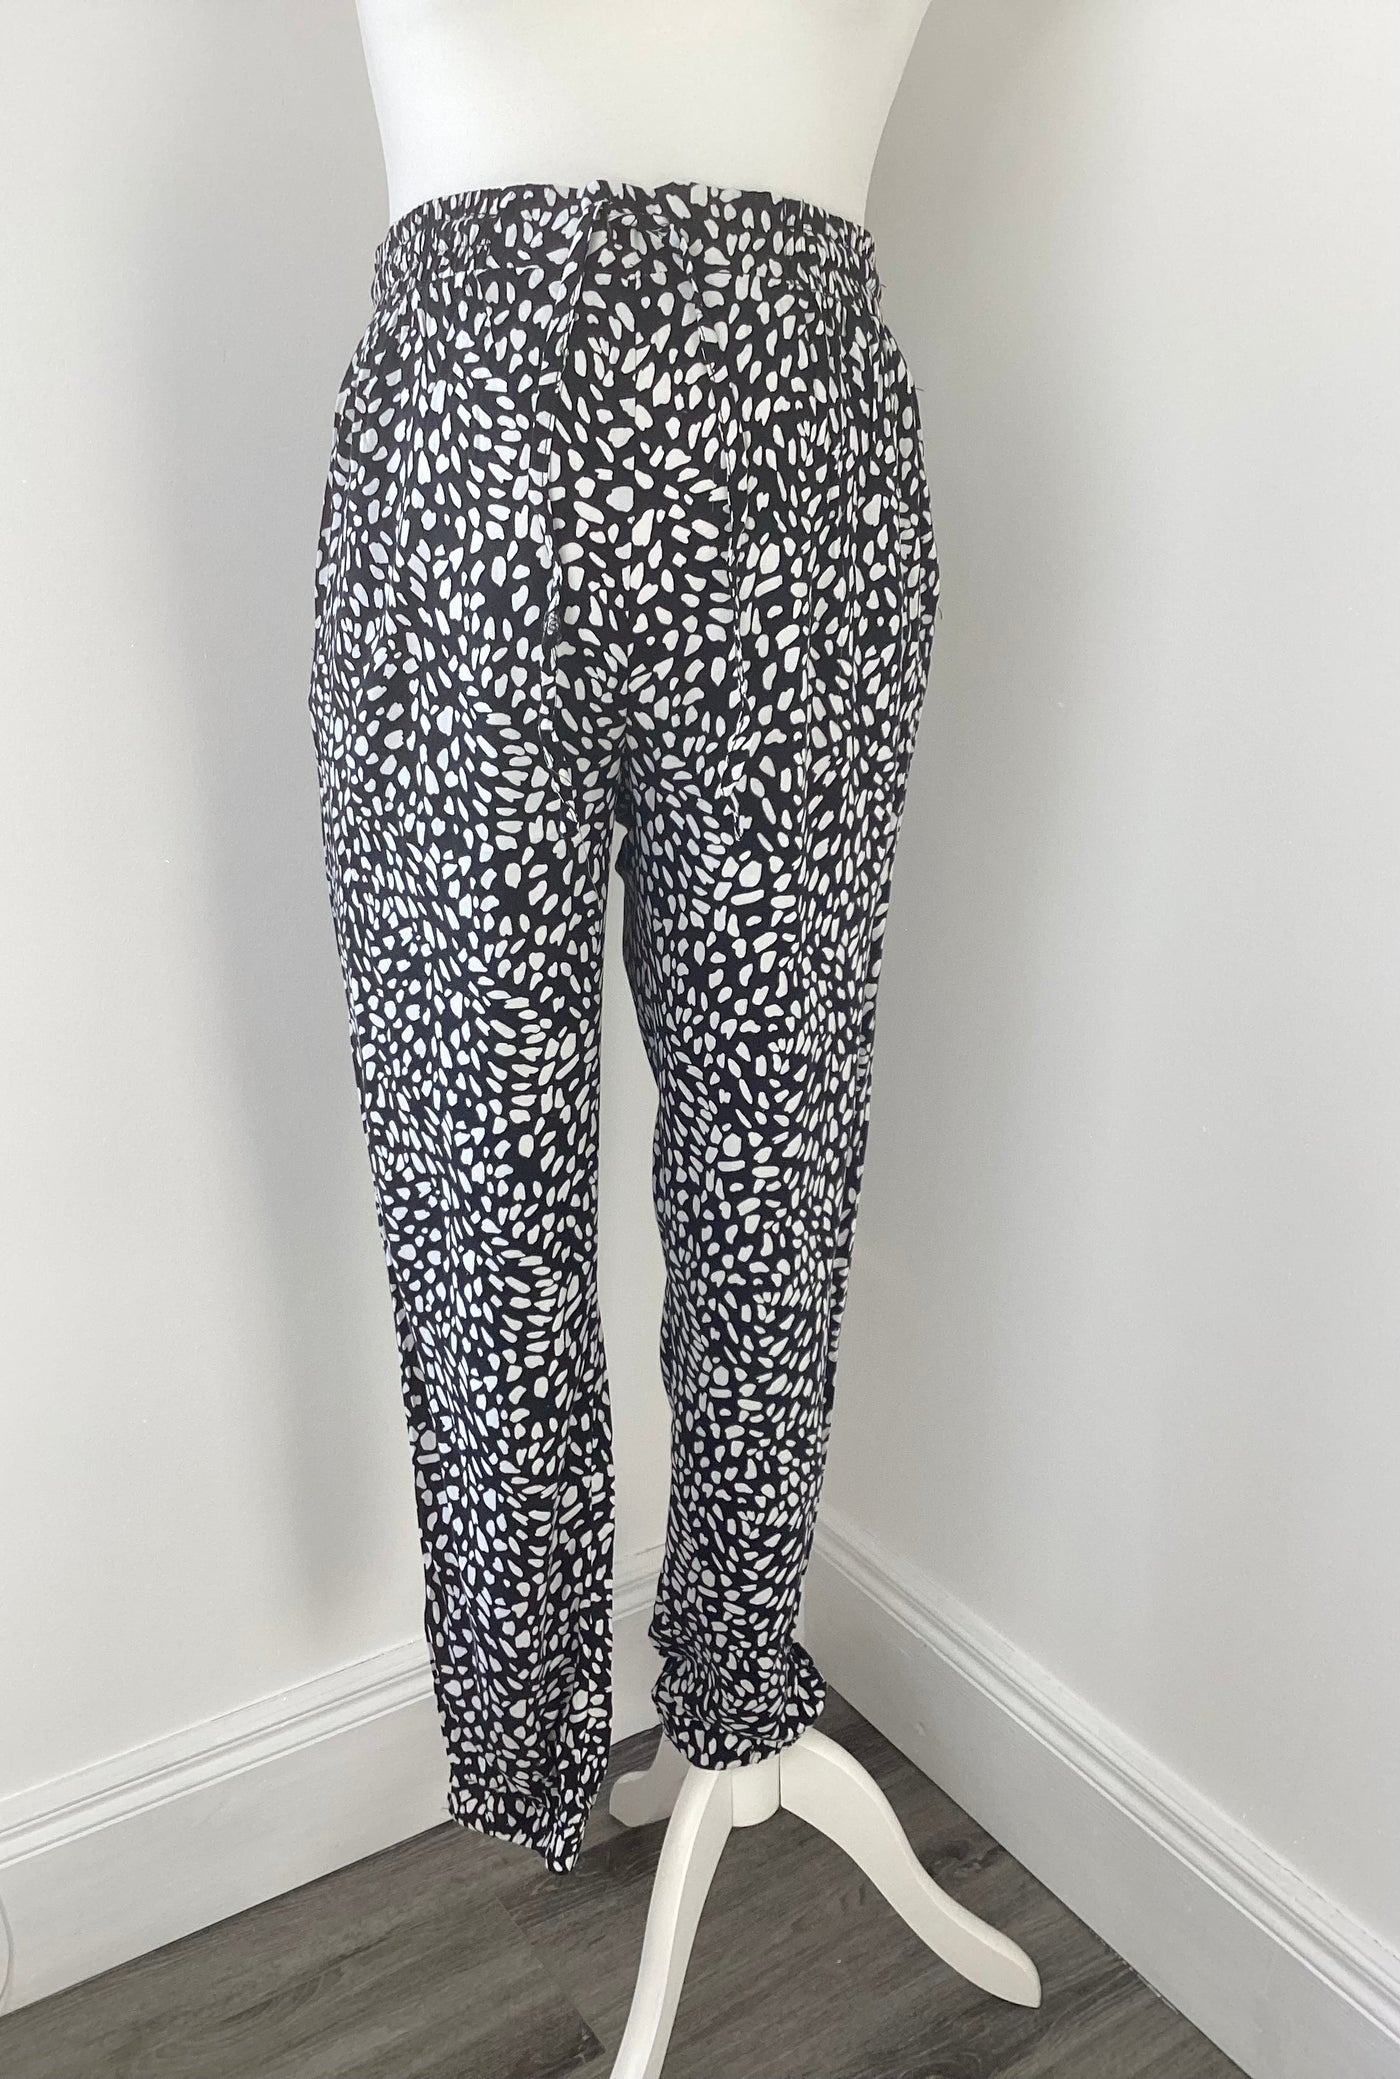 New Look Maternity black & white spot summer trousers - Size 12